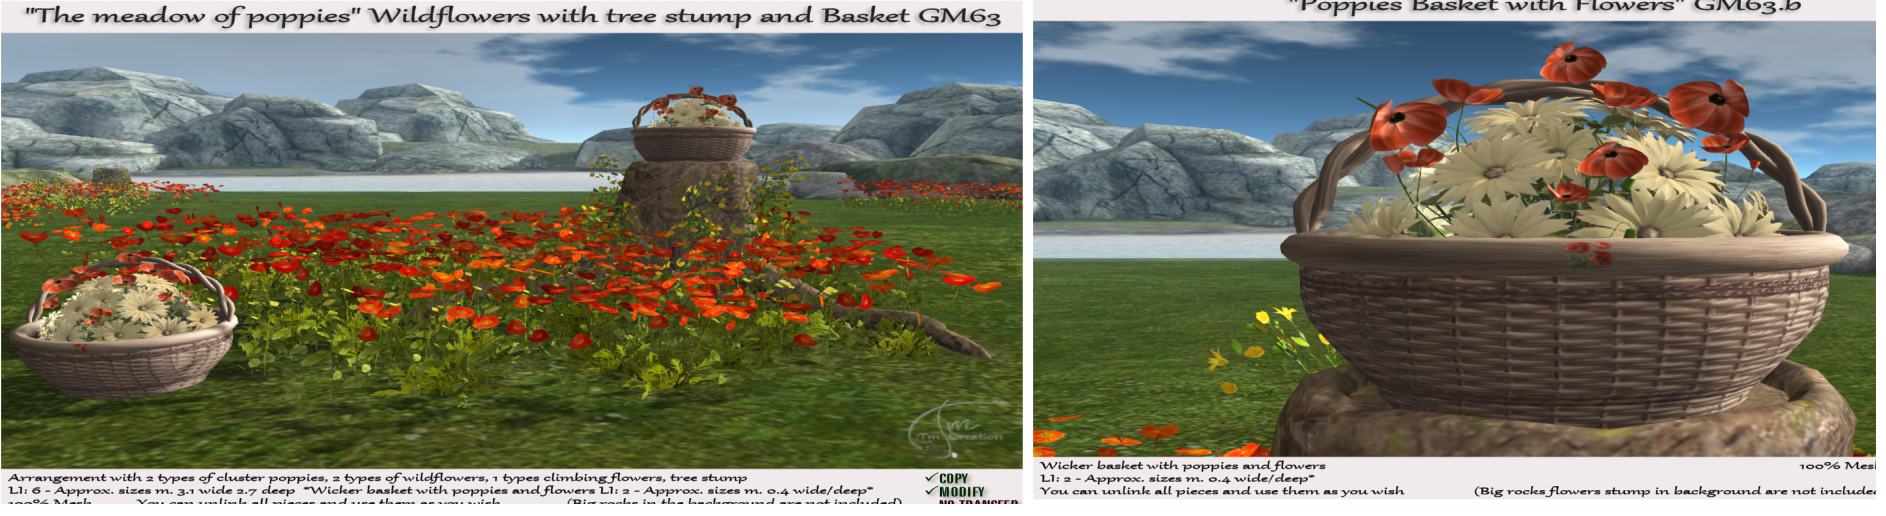 Tm Creations – “The Meadow Of Poppies” Wildflowers With Tree Stump and Basket